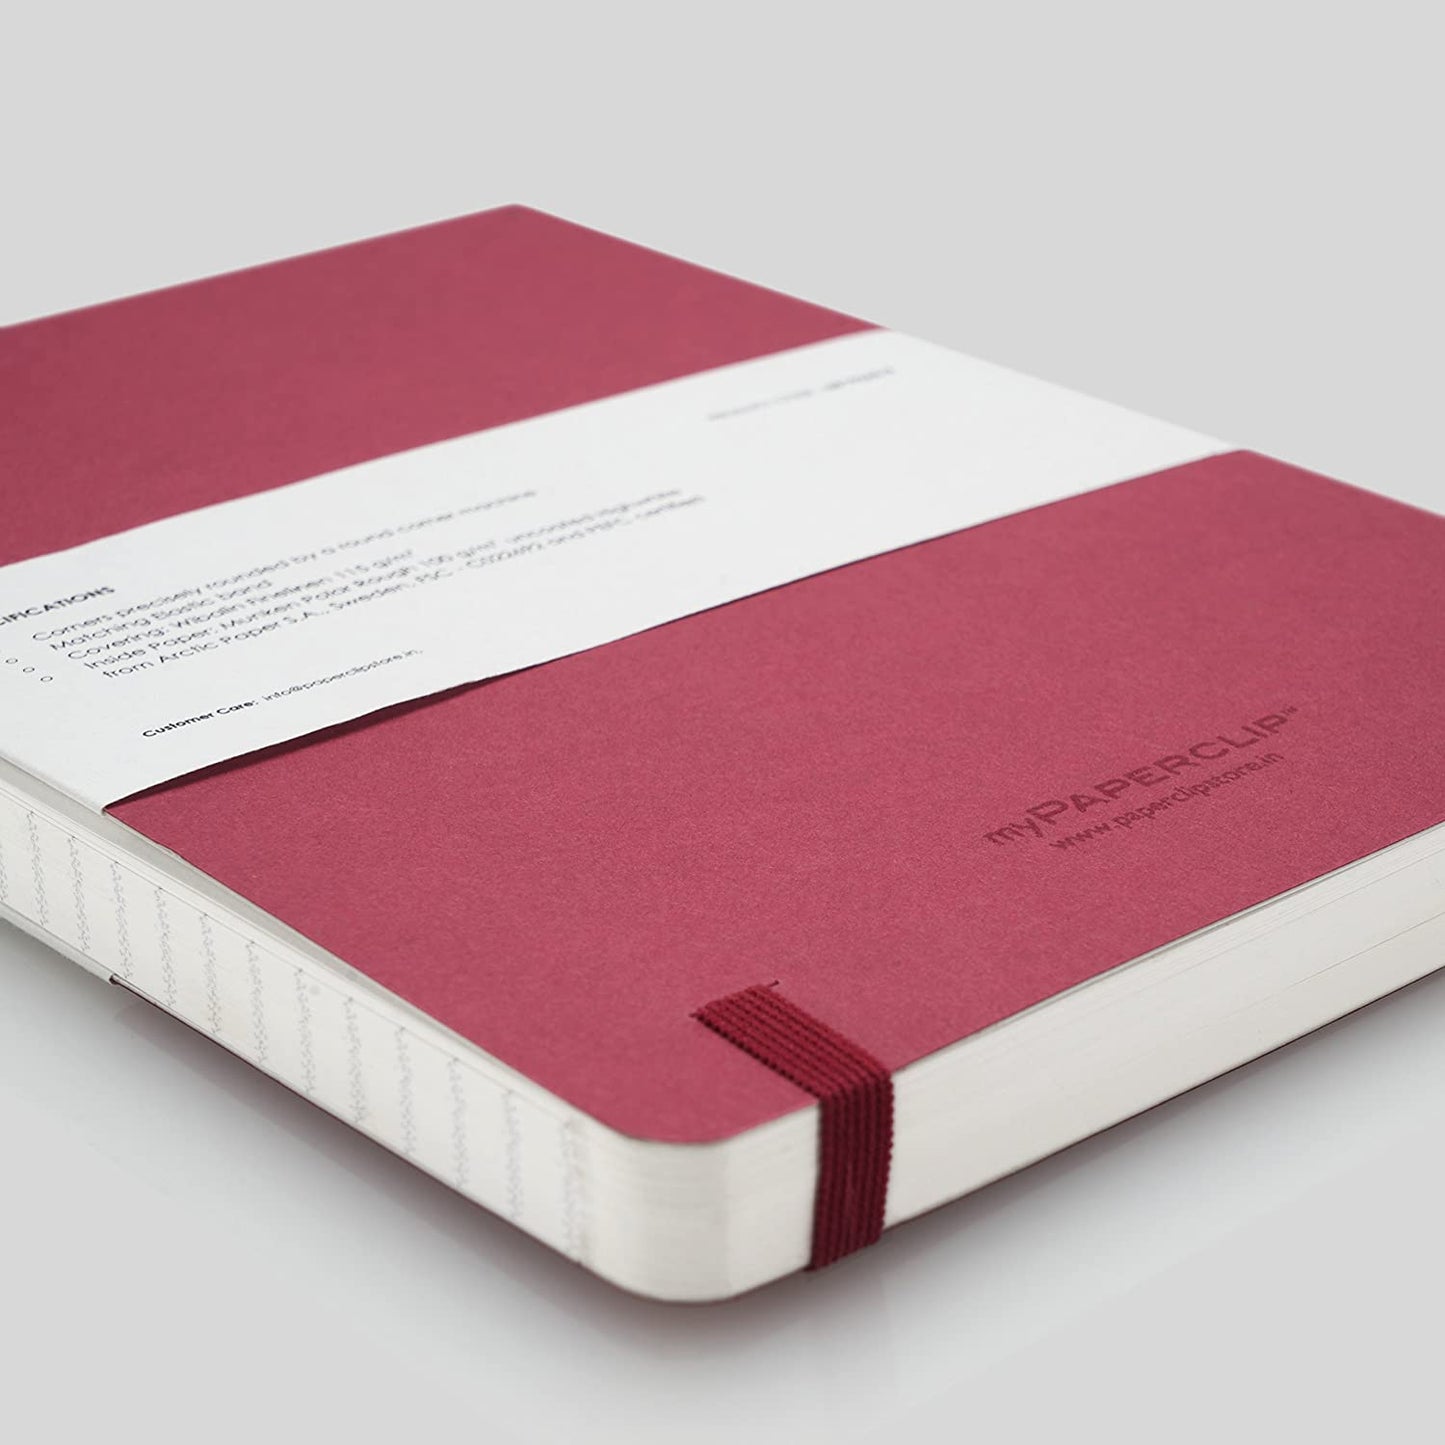 Mypaperclip Limited Edition 192 (176 Plain + 16 Perforated) Pages Notebook, A5 (148 X 210 Mm, 5.83 X 8.27 In.) Lep192A5-P Raspberry